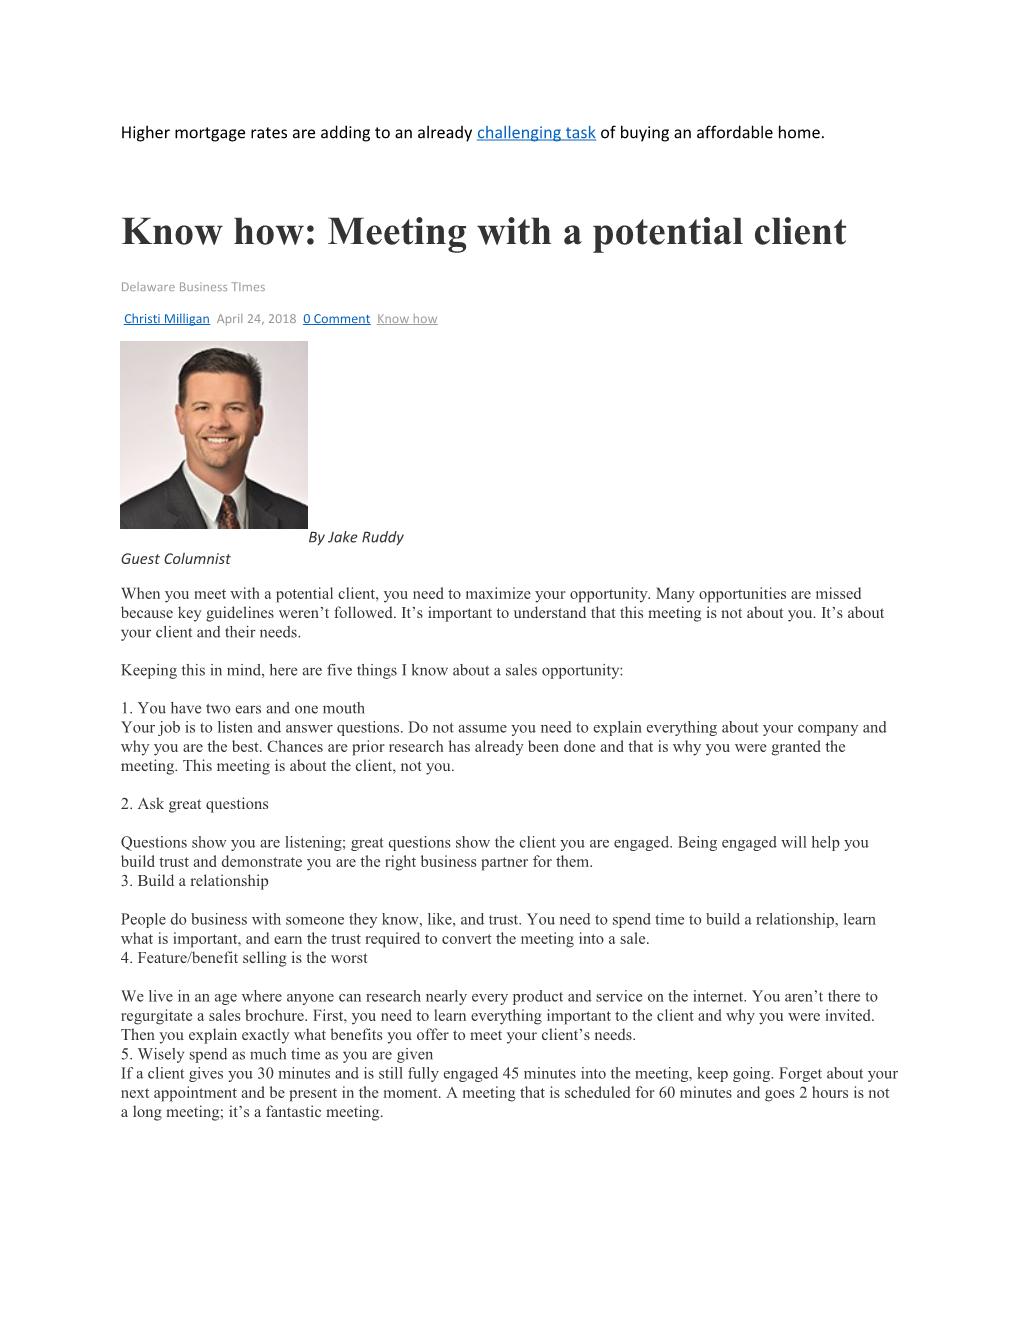 Know How: Meeting with a Potential Client